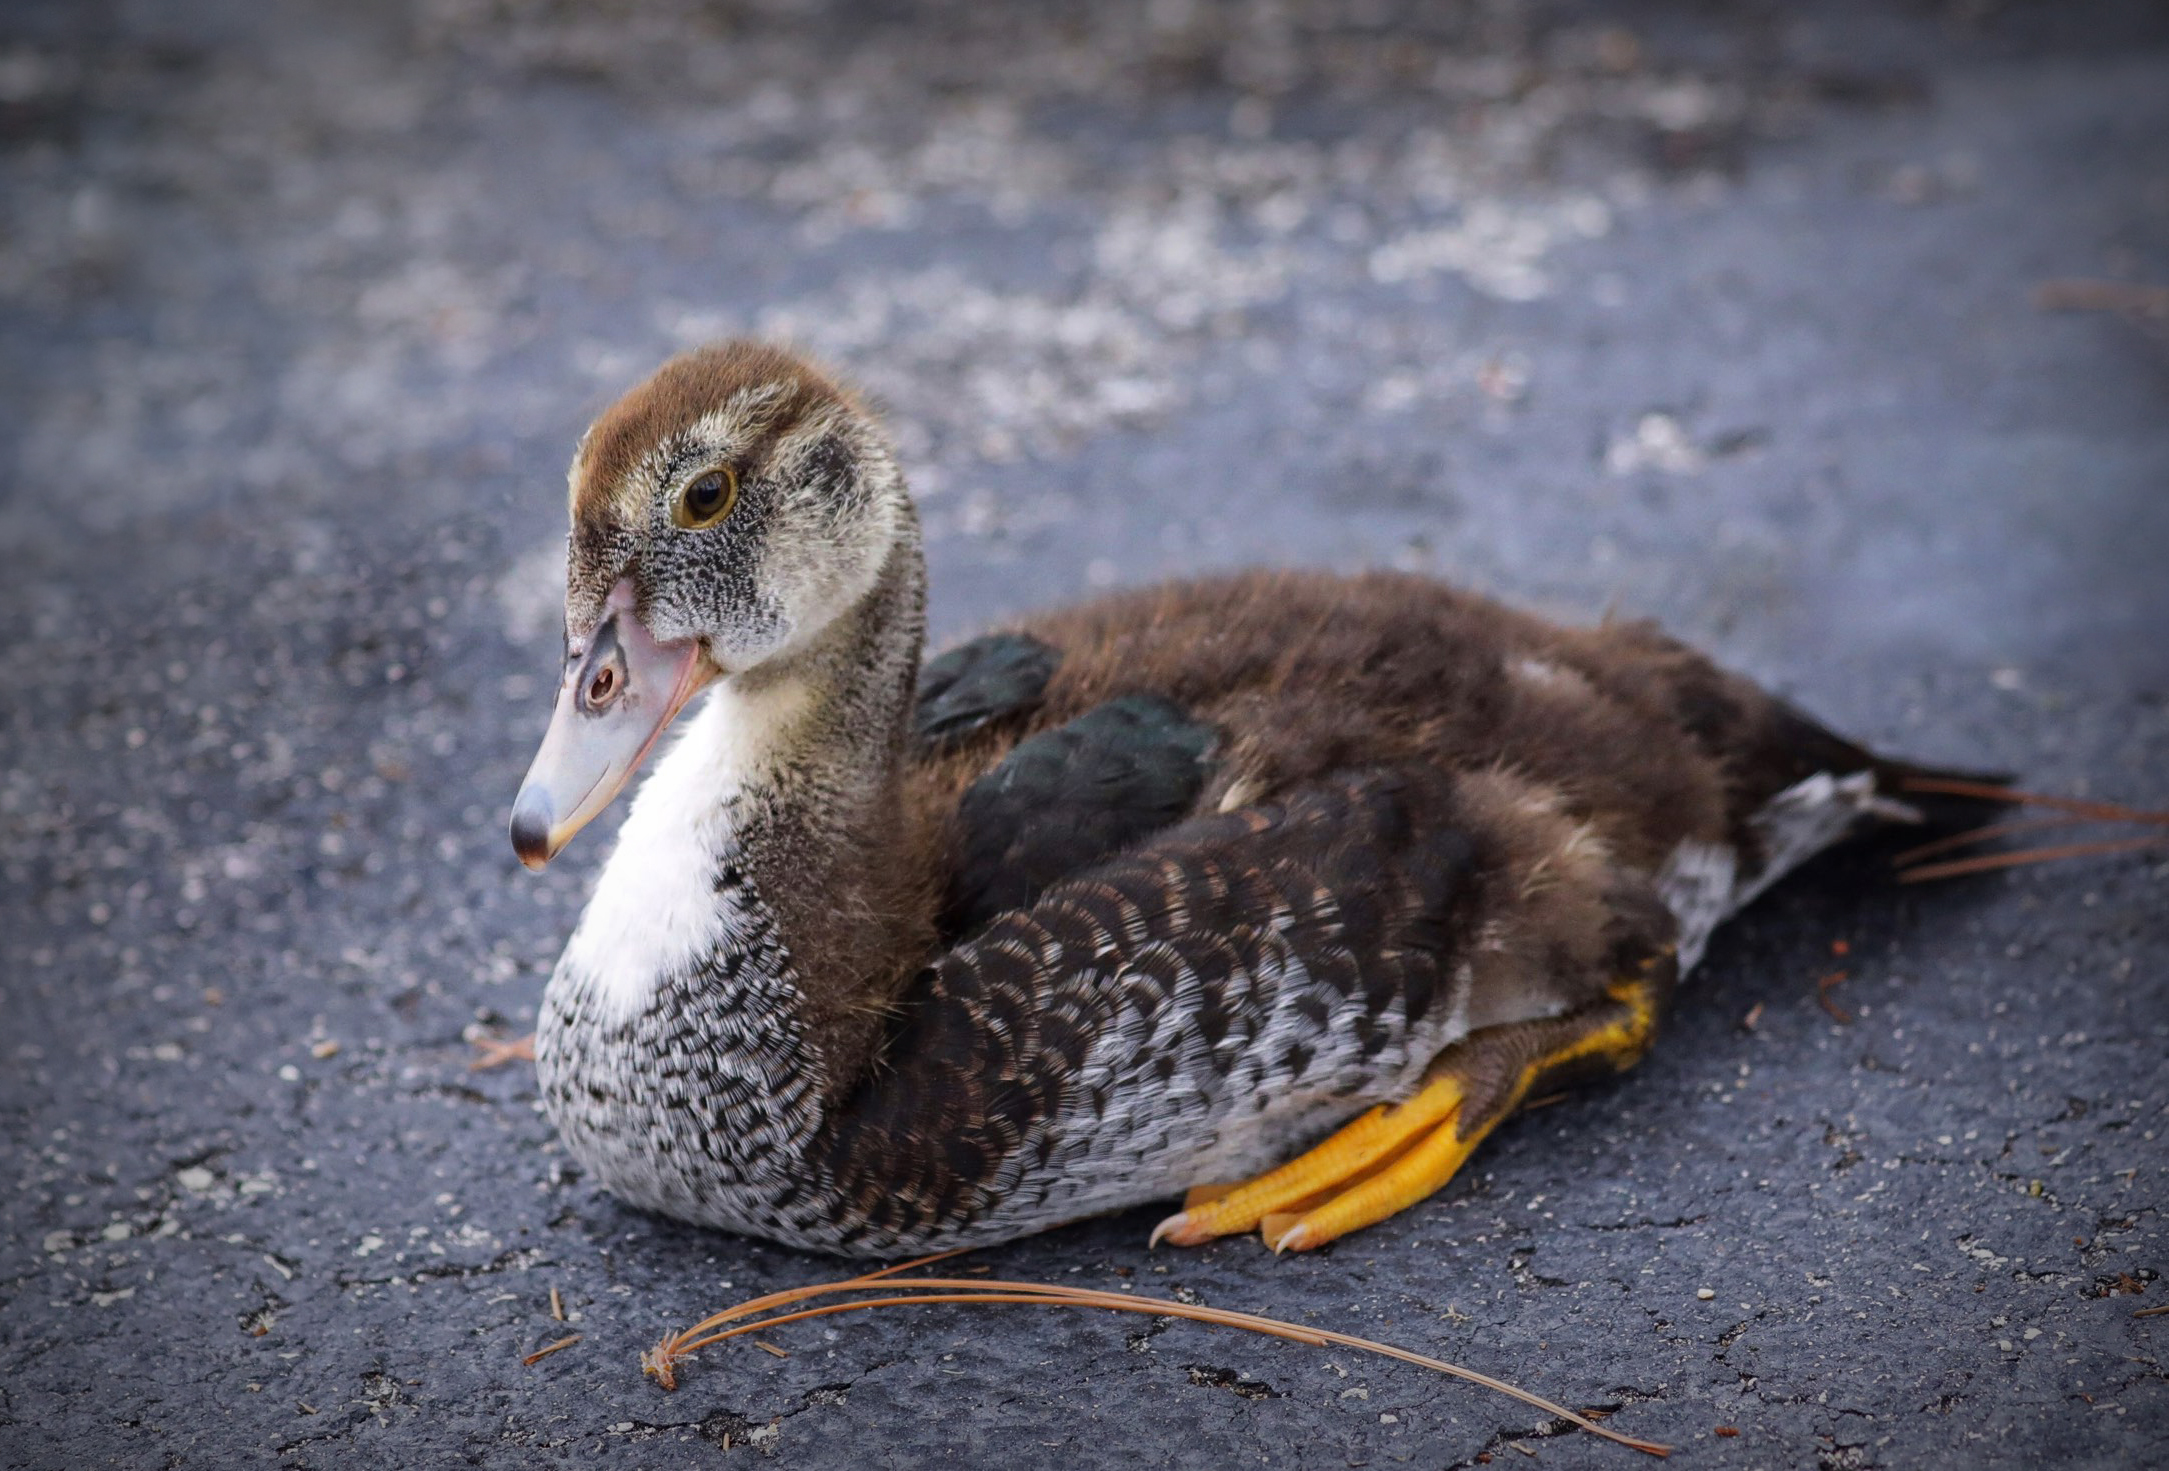 Part 1: How Did 2 Ducks End Up Living In A Townhouse?